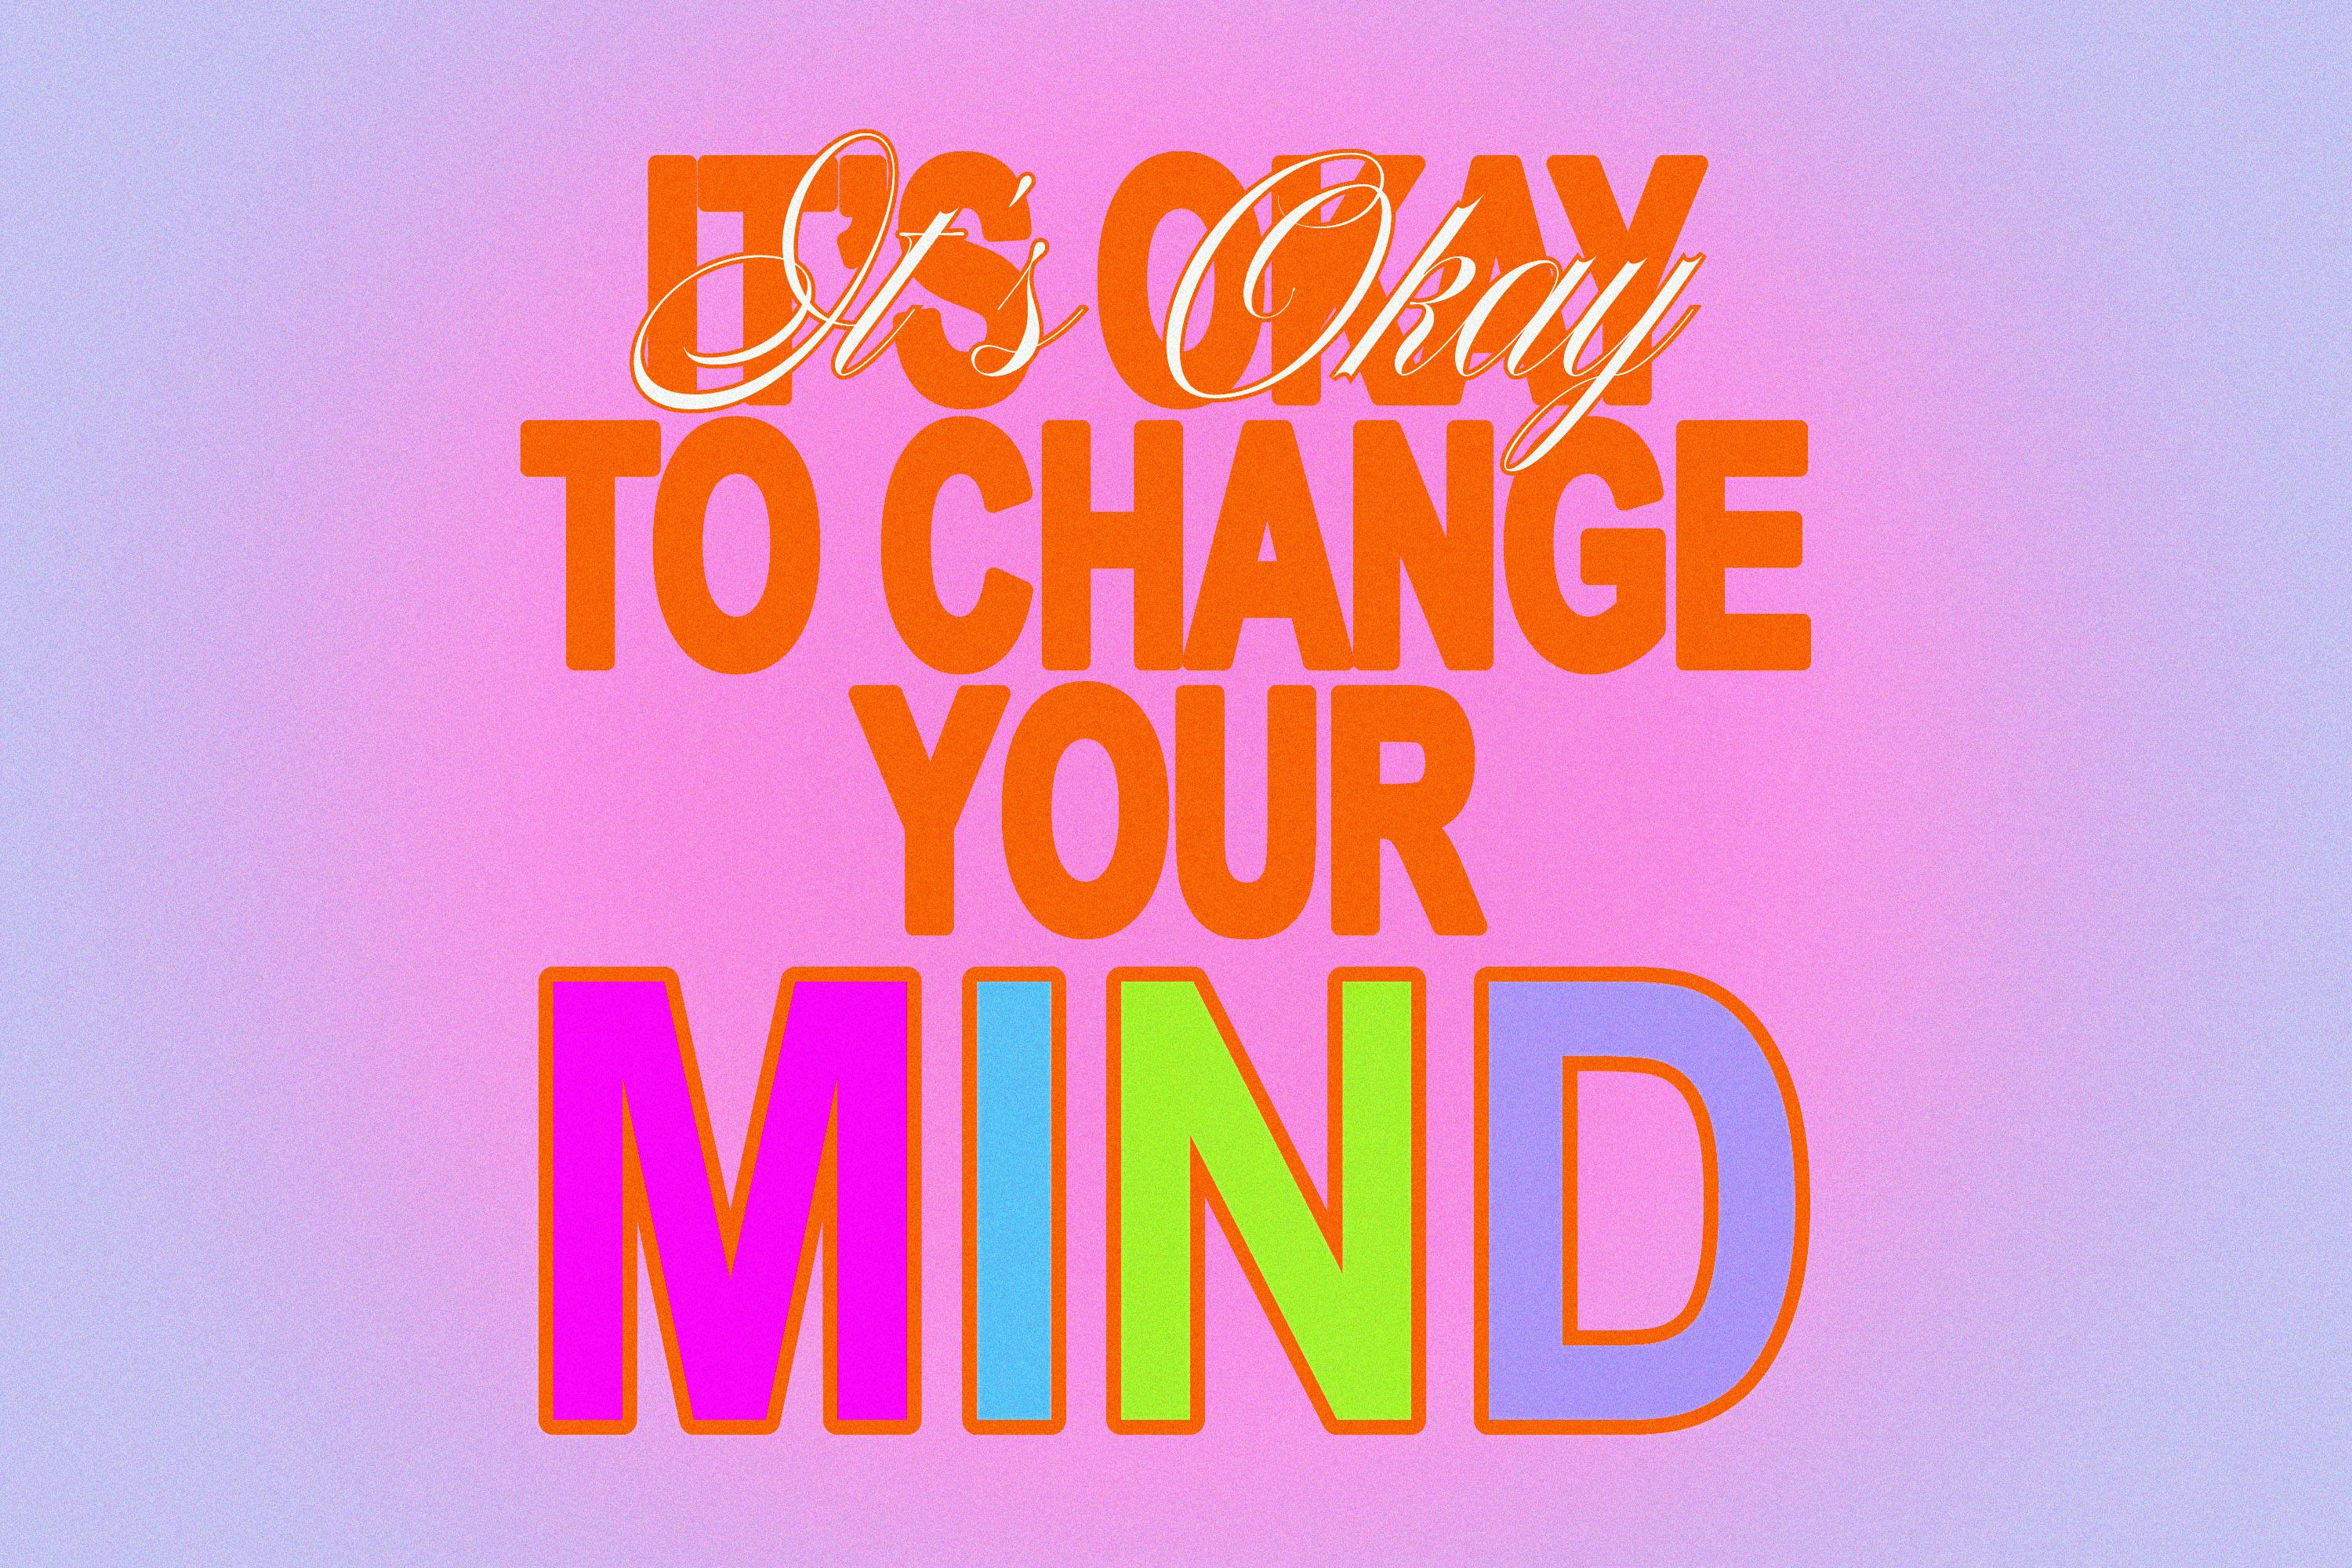 Student Series: It’s Okay to Change Your Mind